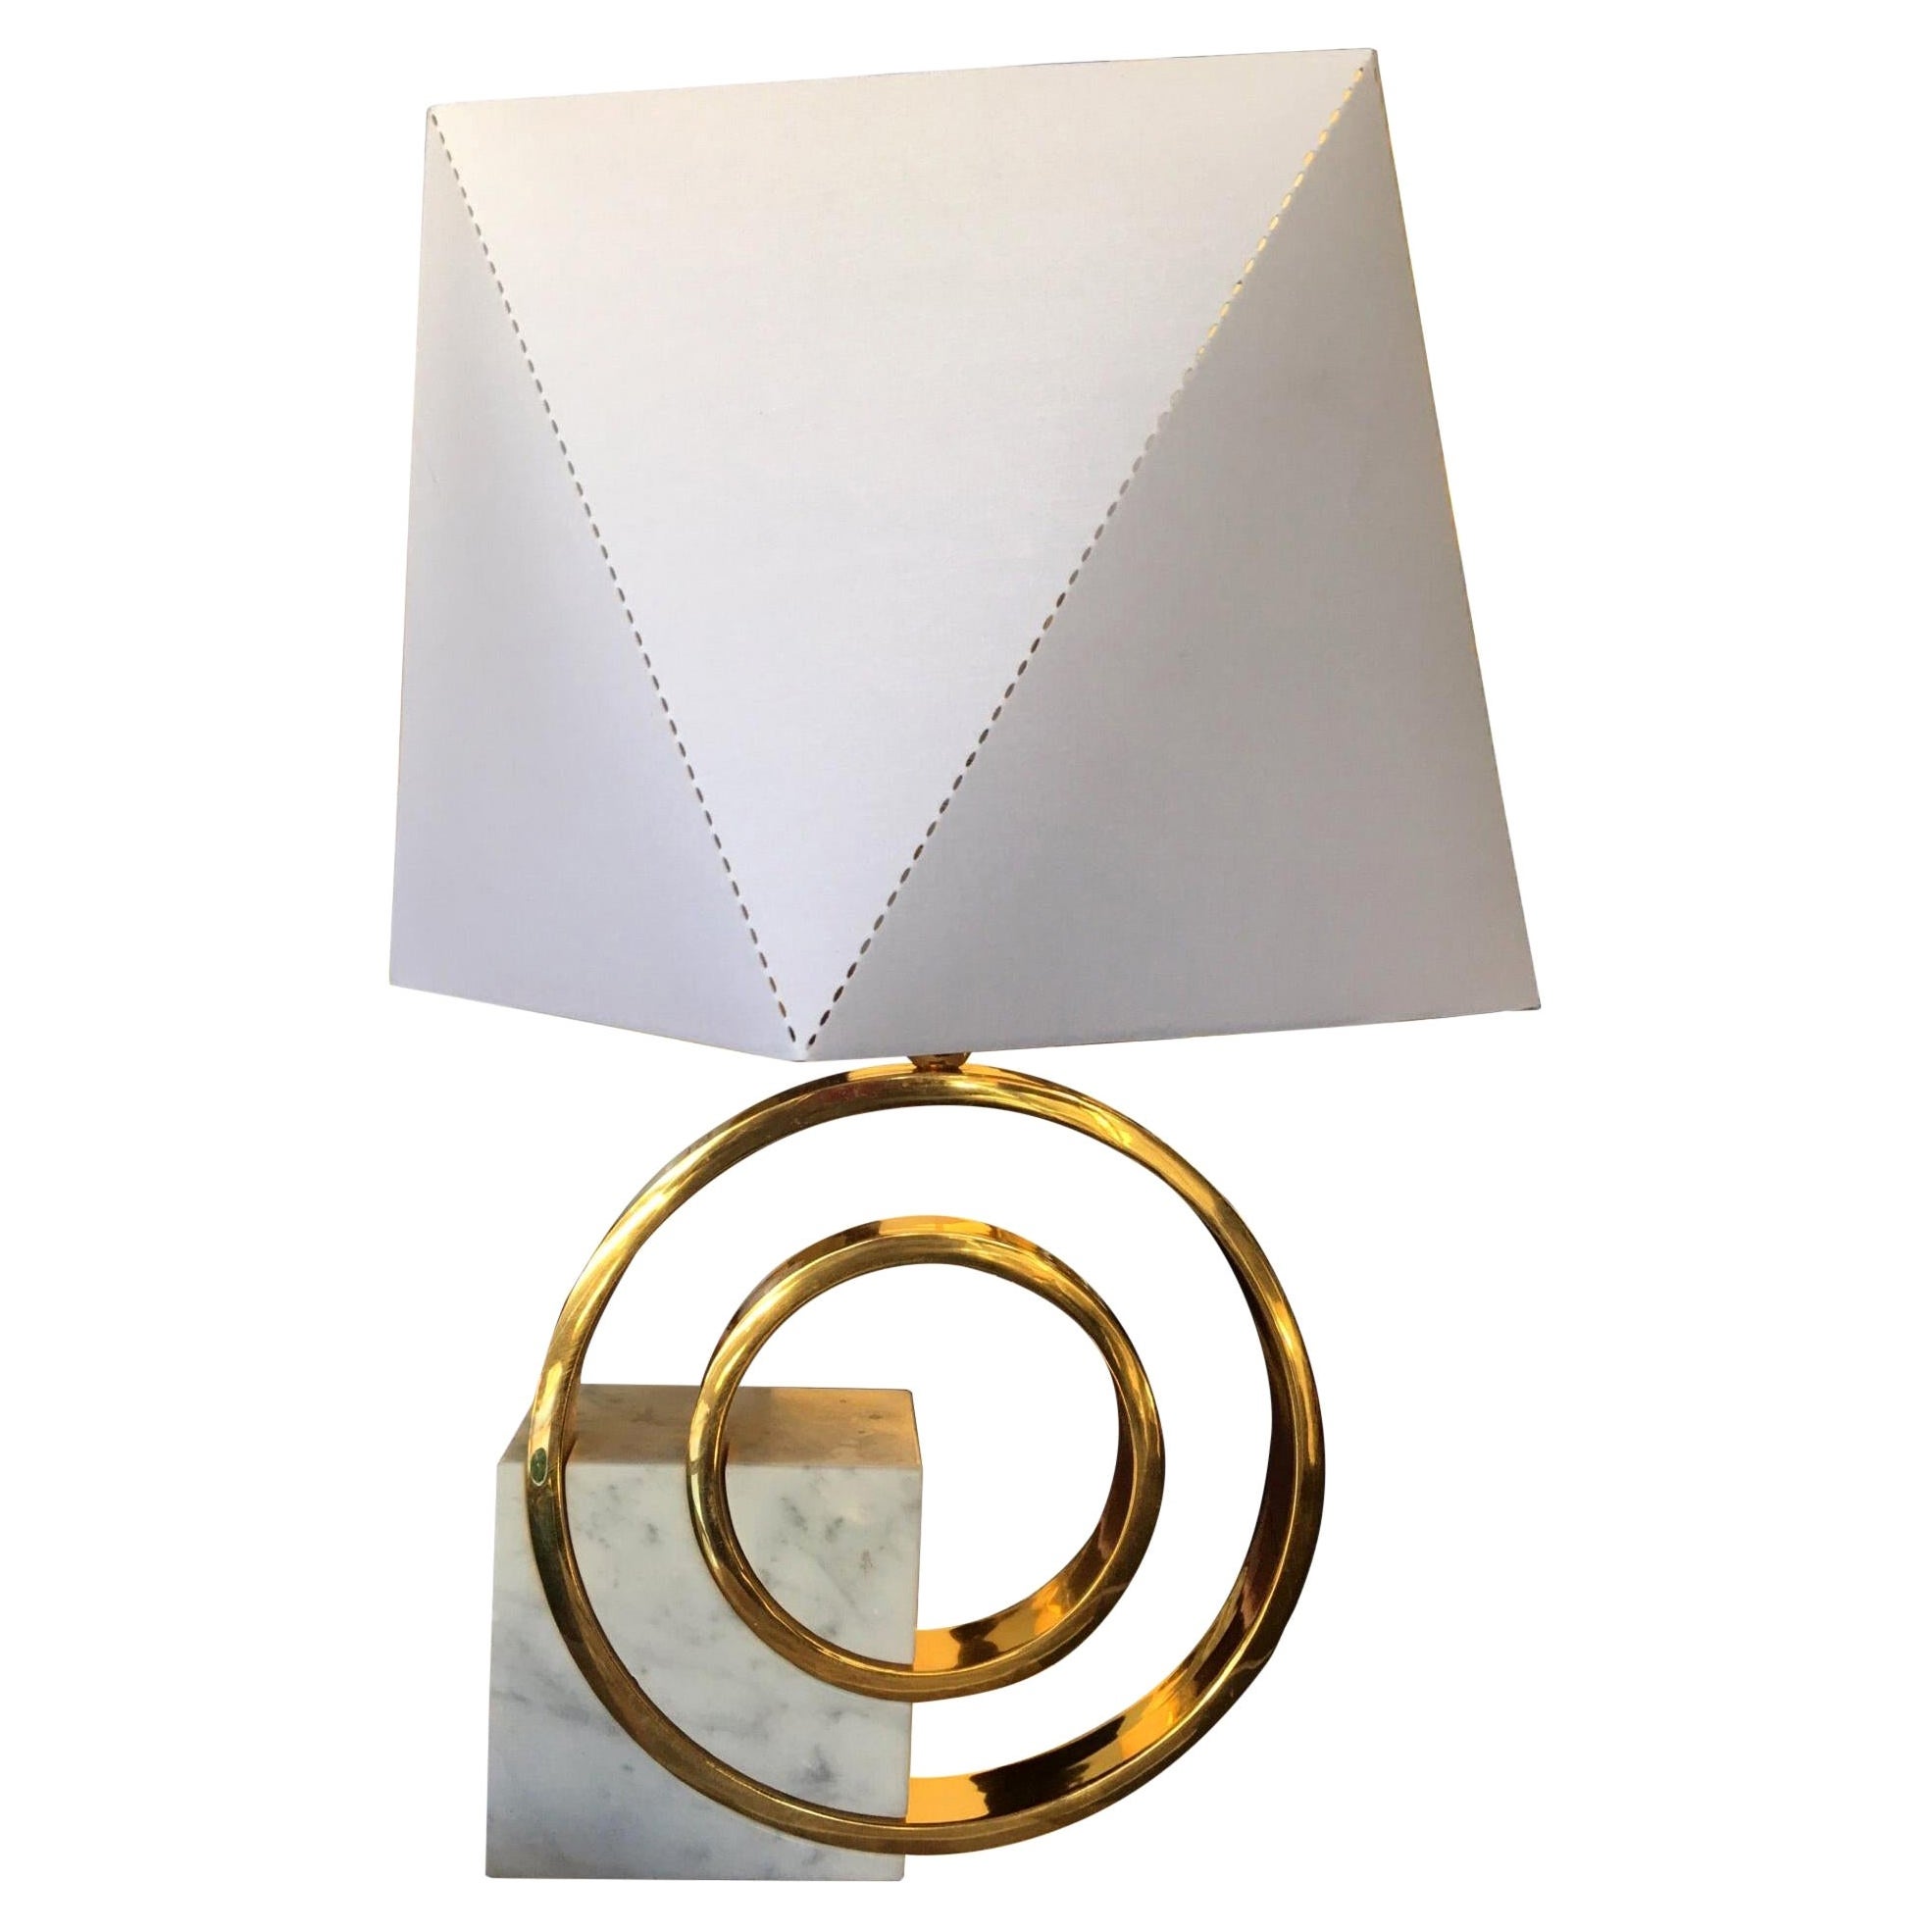  1970s Italian Modern Lamp in Brass & Marble Custom Shade by Giovanni Banci For Sale